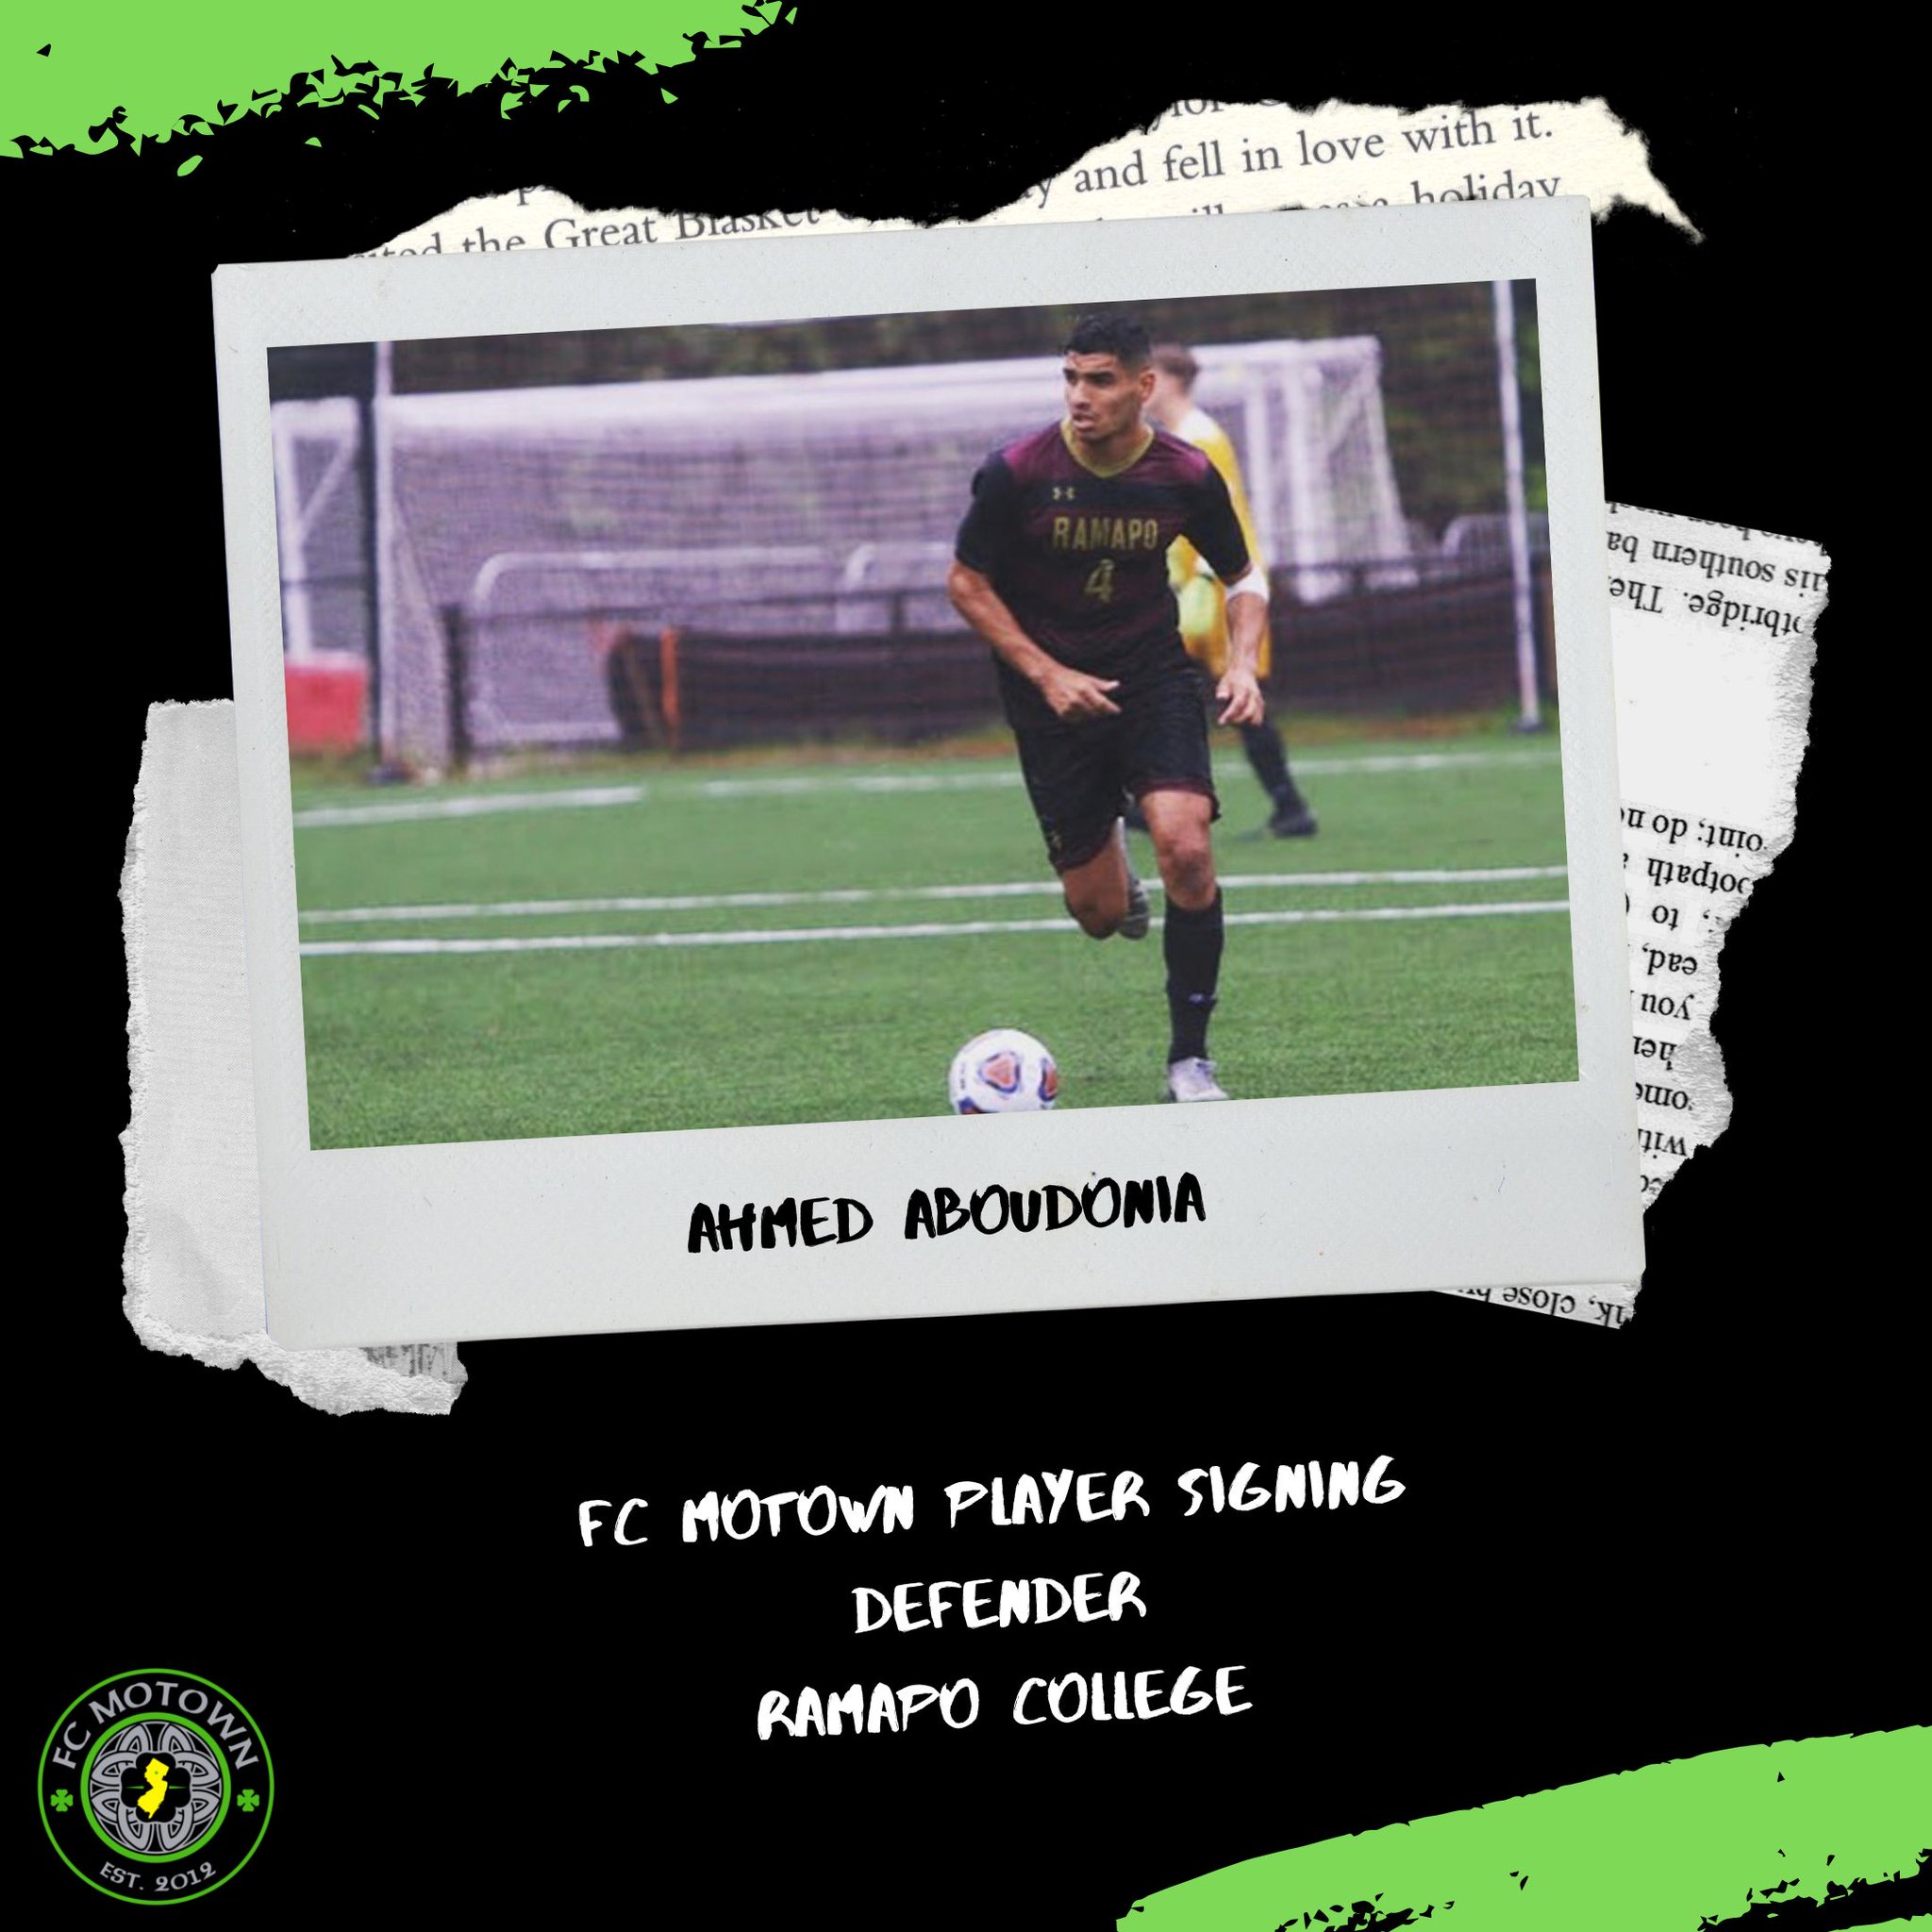 Fc Motown Celtics Twitterren Excited To Announce The Signing Of Ahmed Aboudonia To The Roster The Big Egyptian Played Ramapocollegenj And Had A Strong 19 Season For Us Hopefully There Are